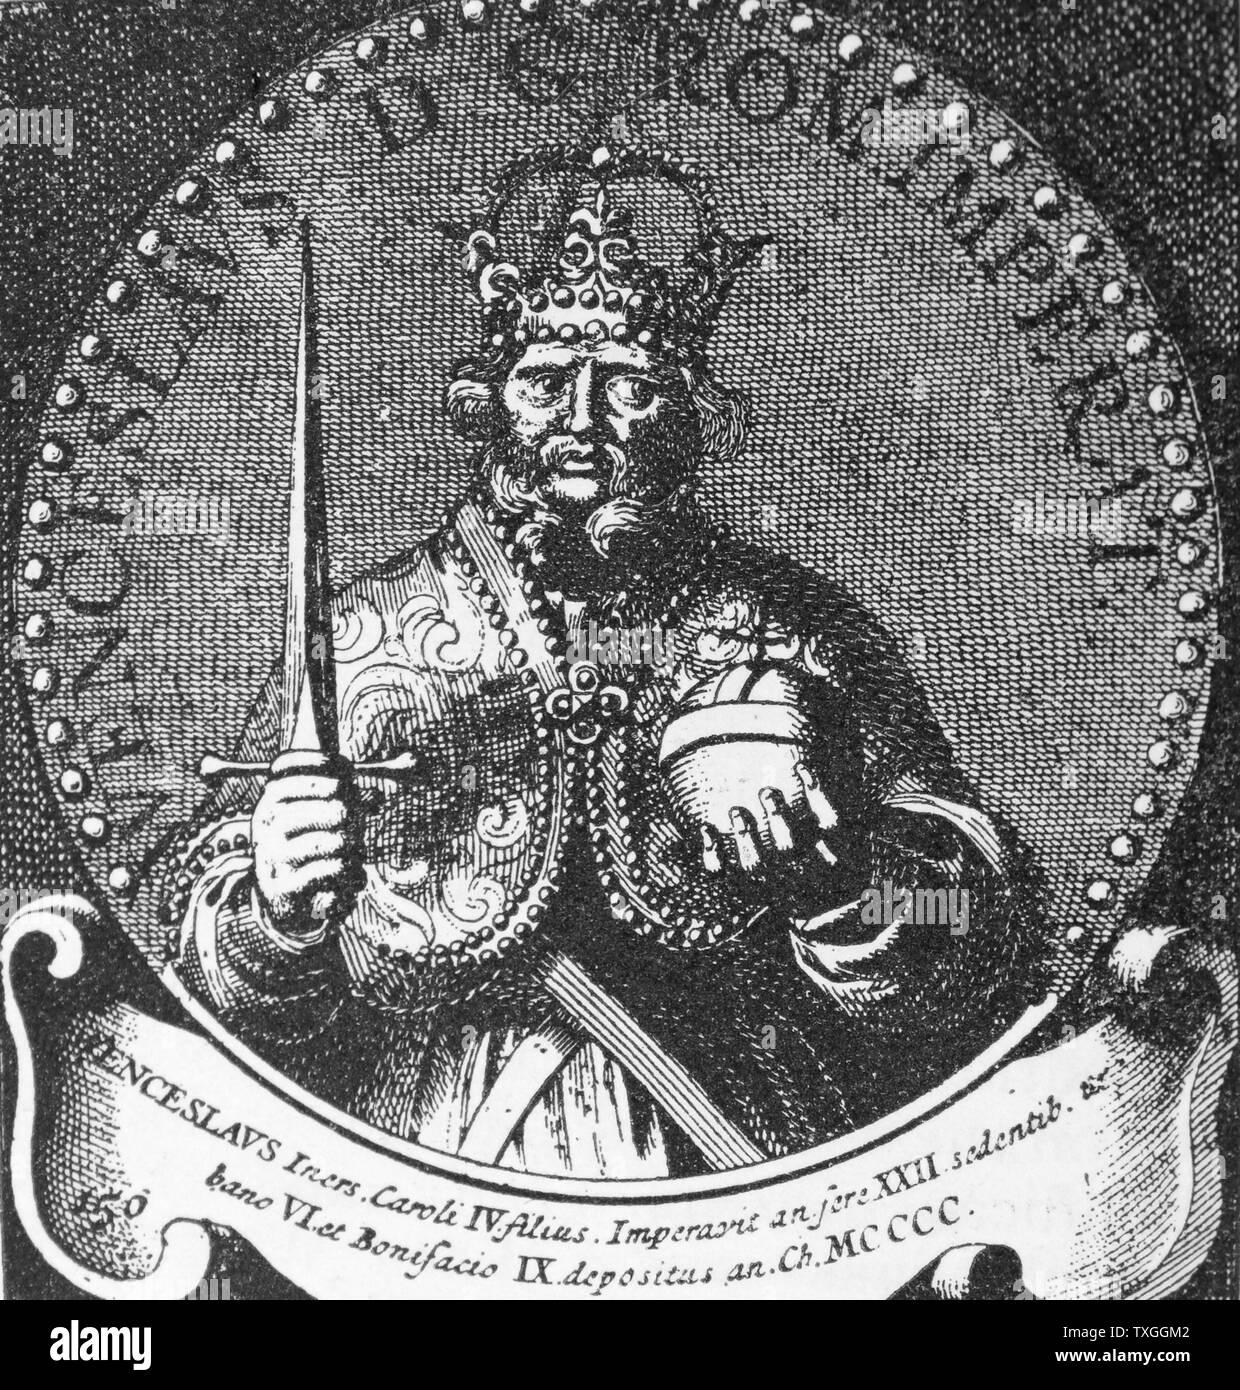 Wenzel IV, King of Bohemia. The eldest son of Charles IV, he succeeded his father in 1378 and was also elected Emperor of Germany. Stock Photo